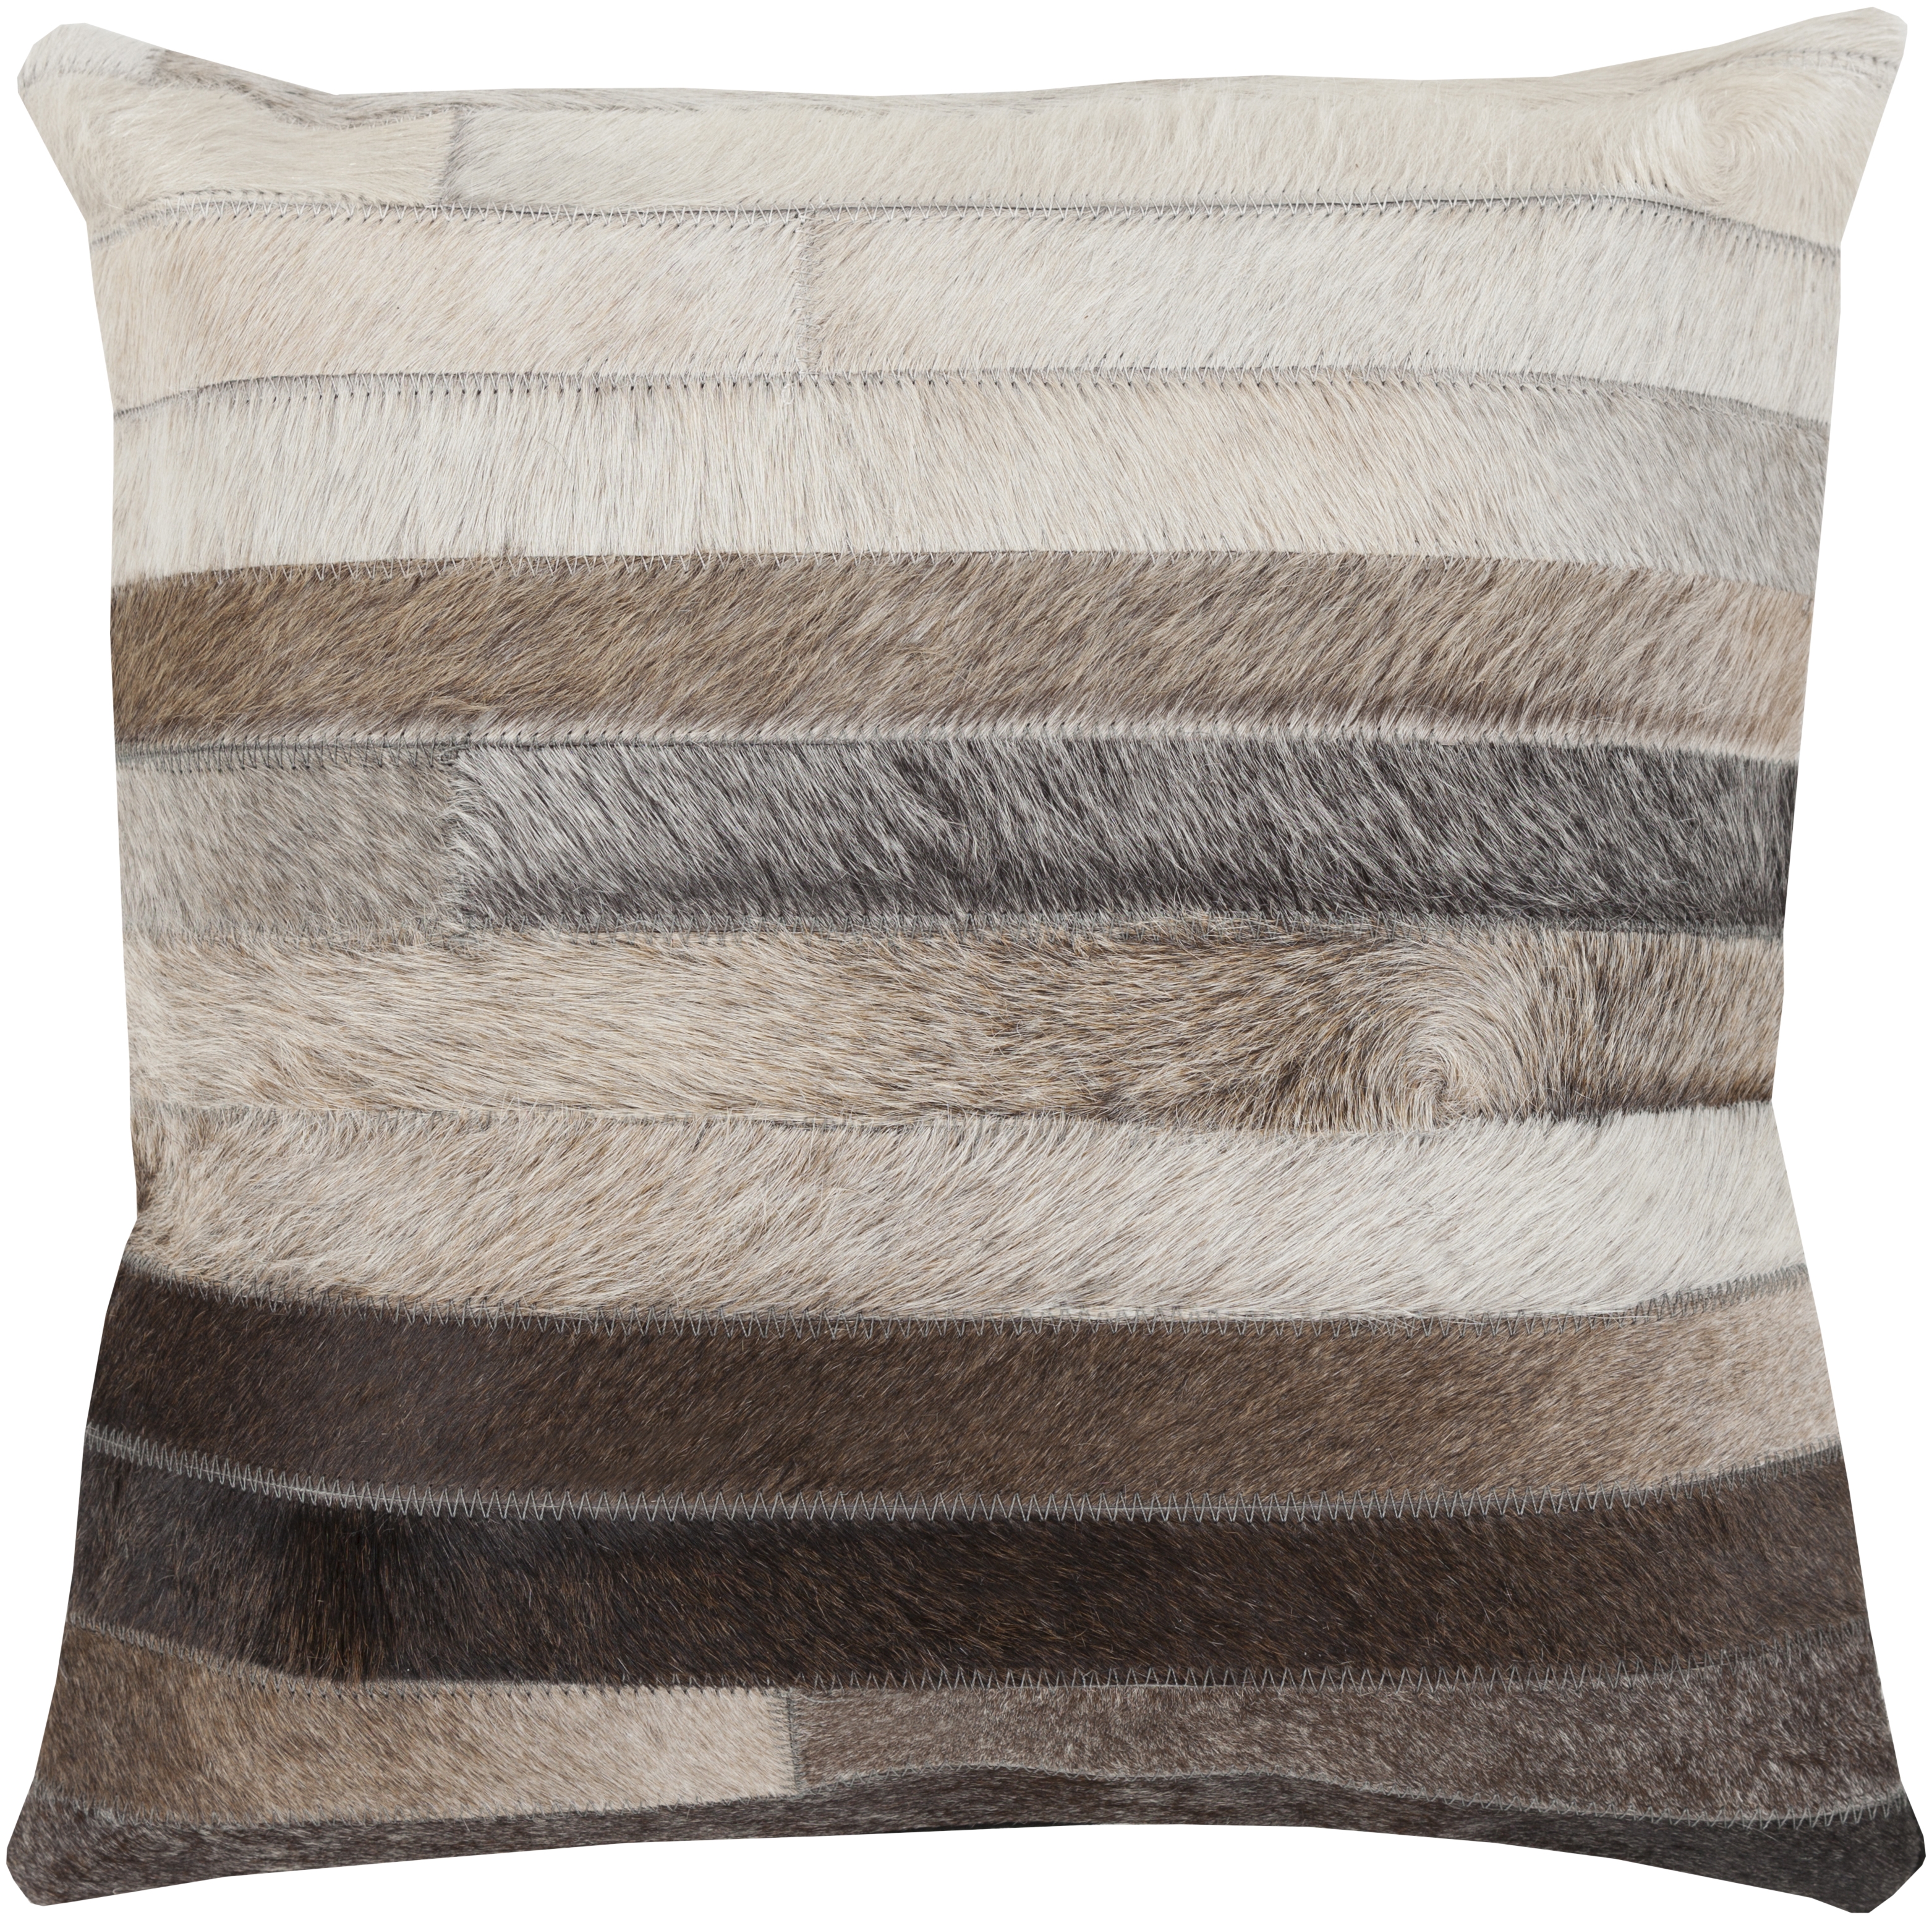 Trail Throw Pillow, 18" x 18", with down insert - Image 0